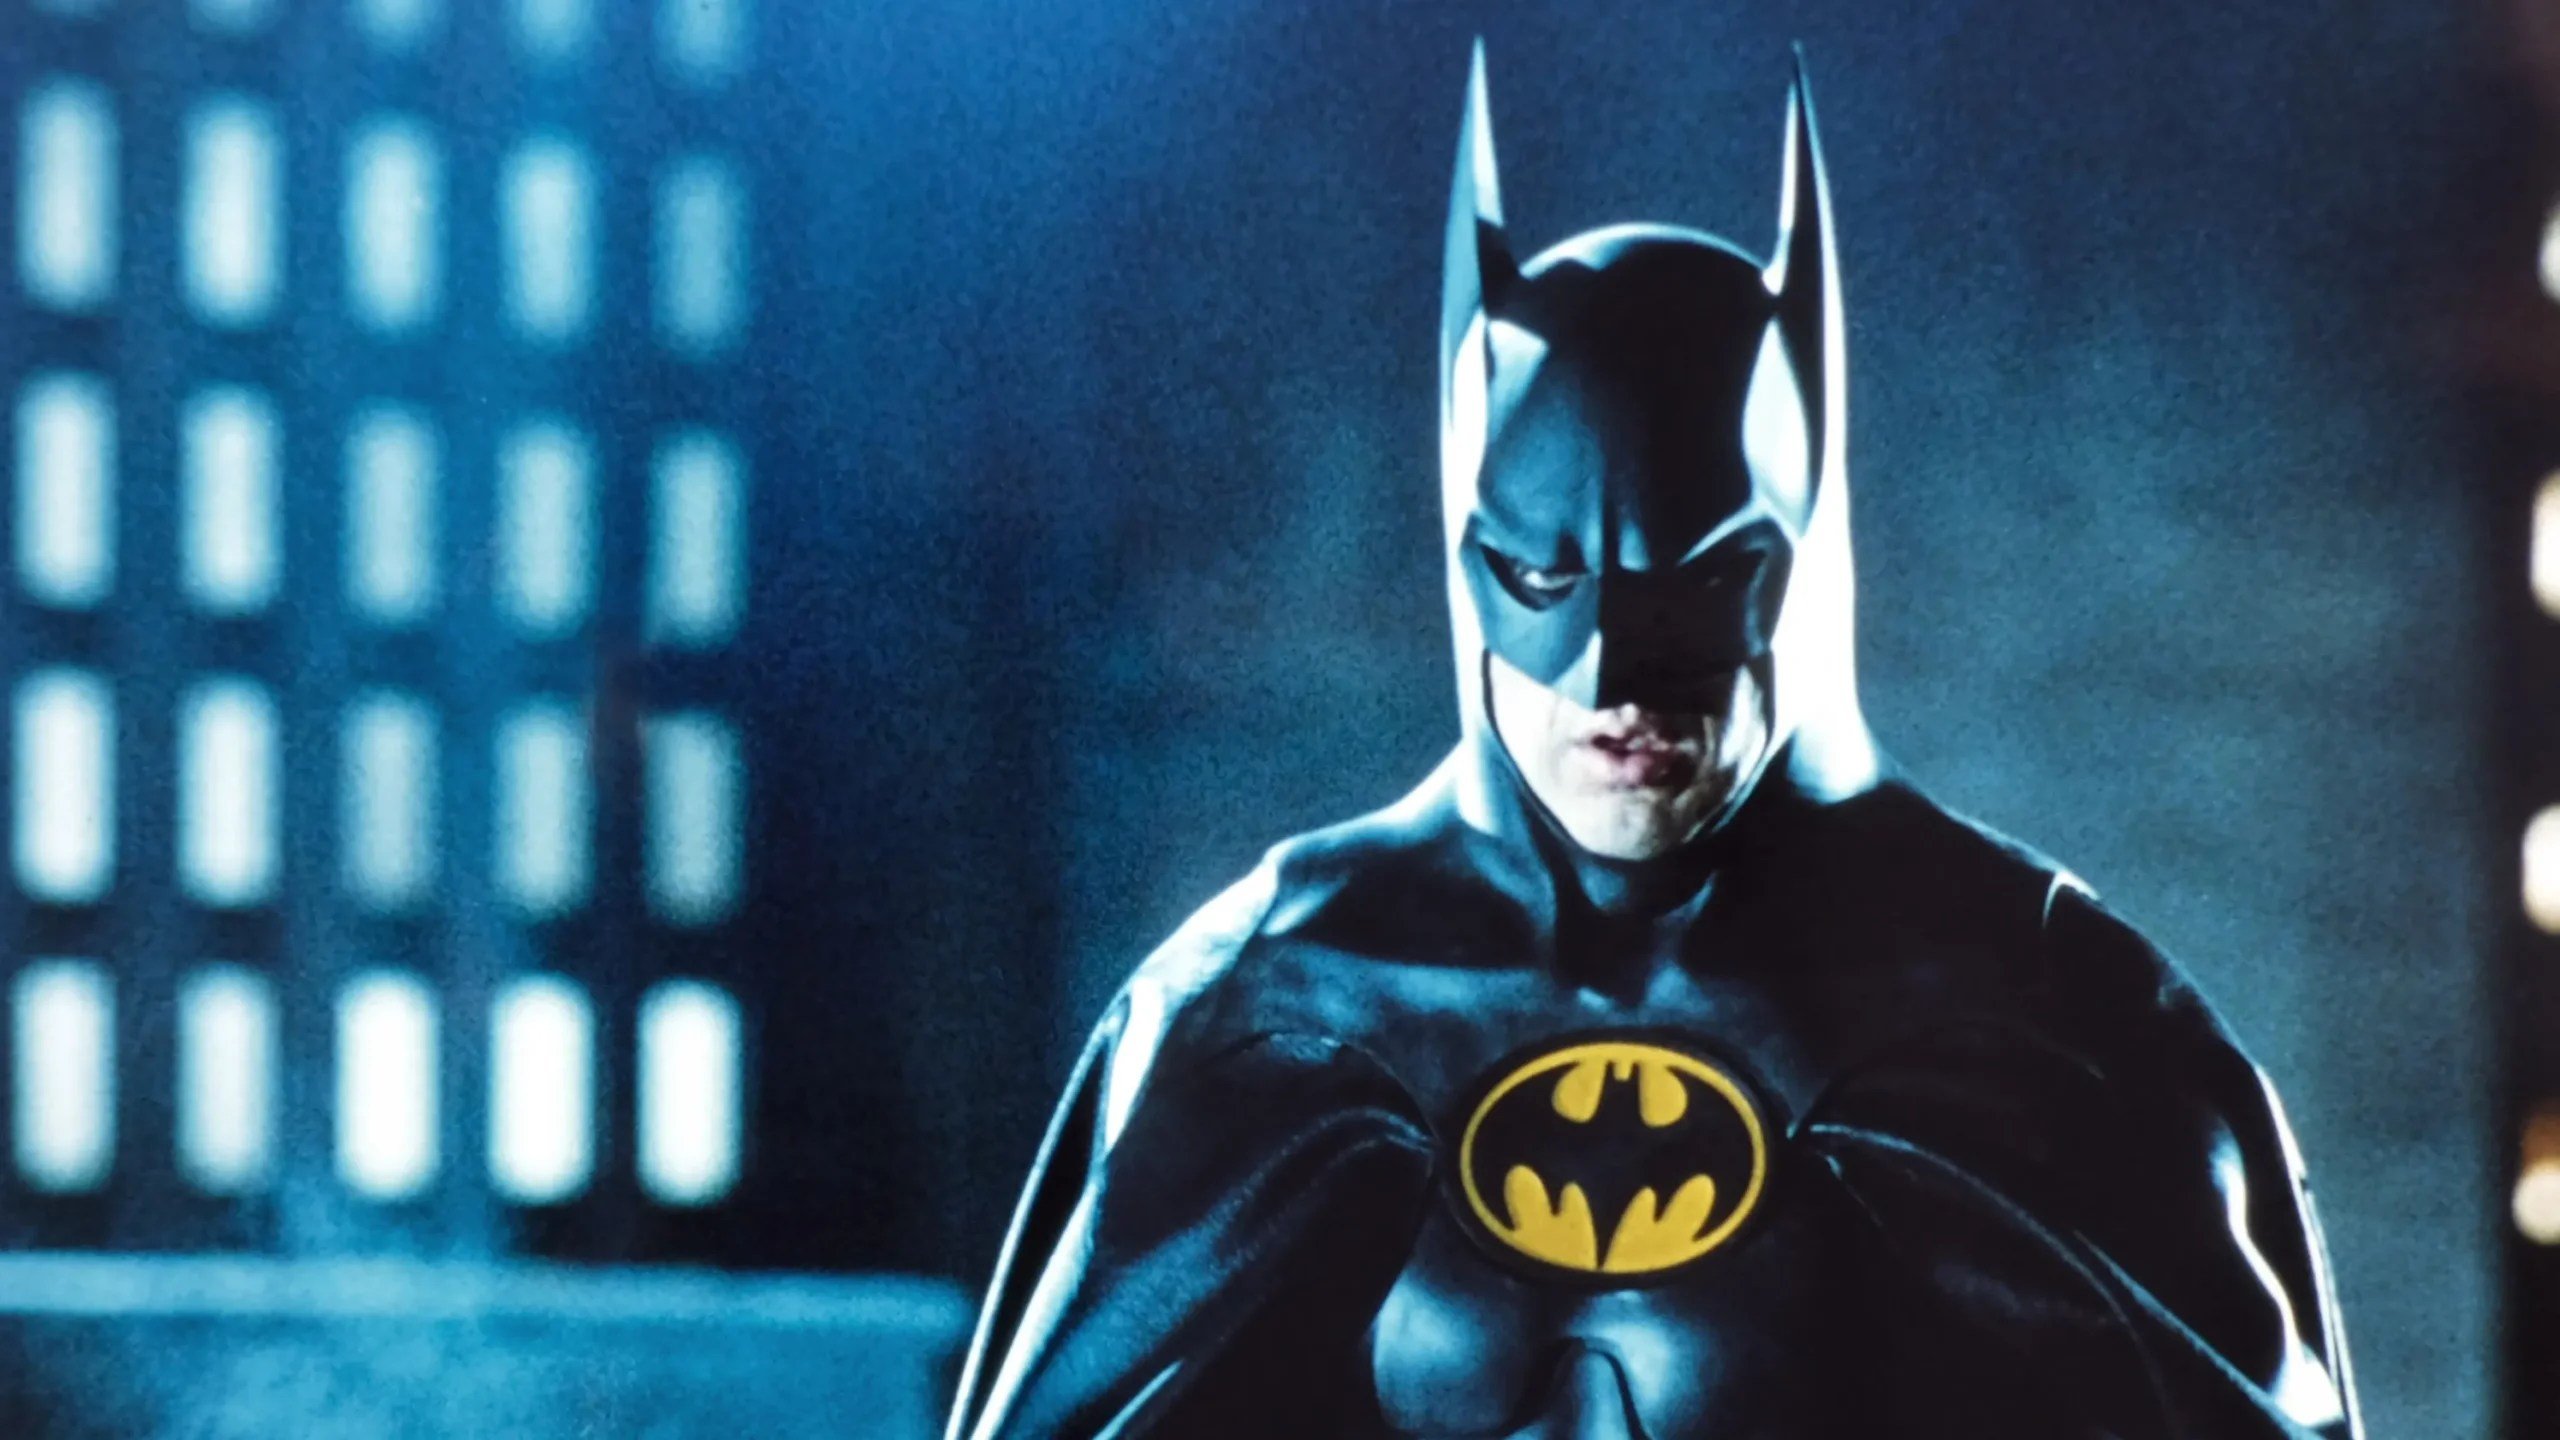 On this day, Batman 1989 hit theaters